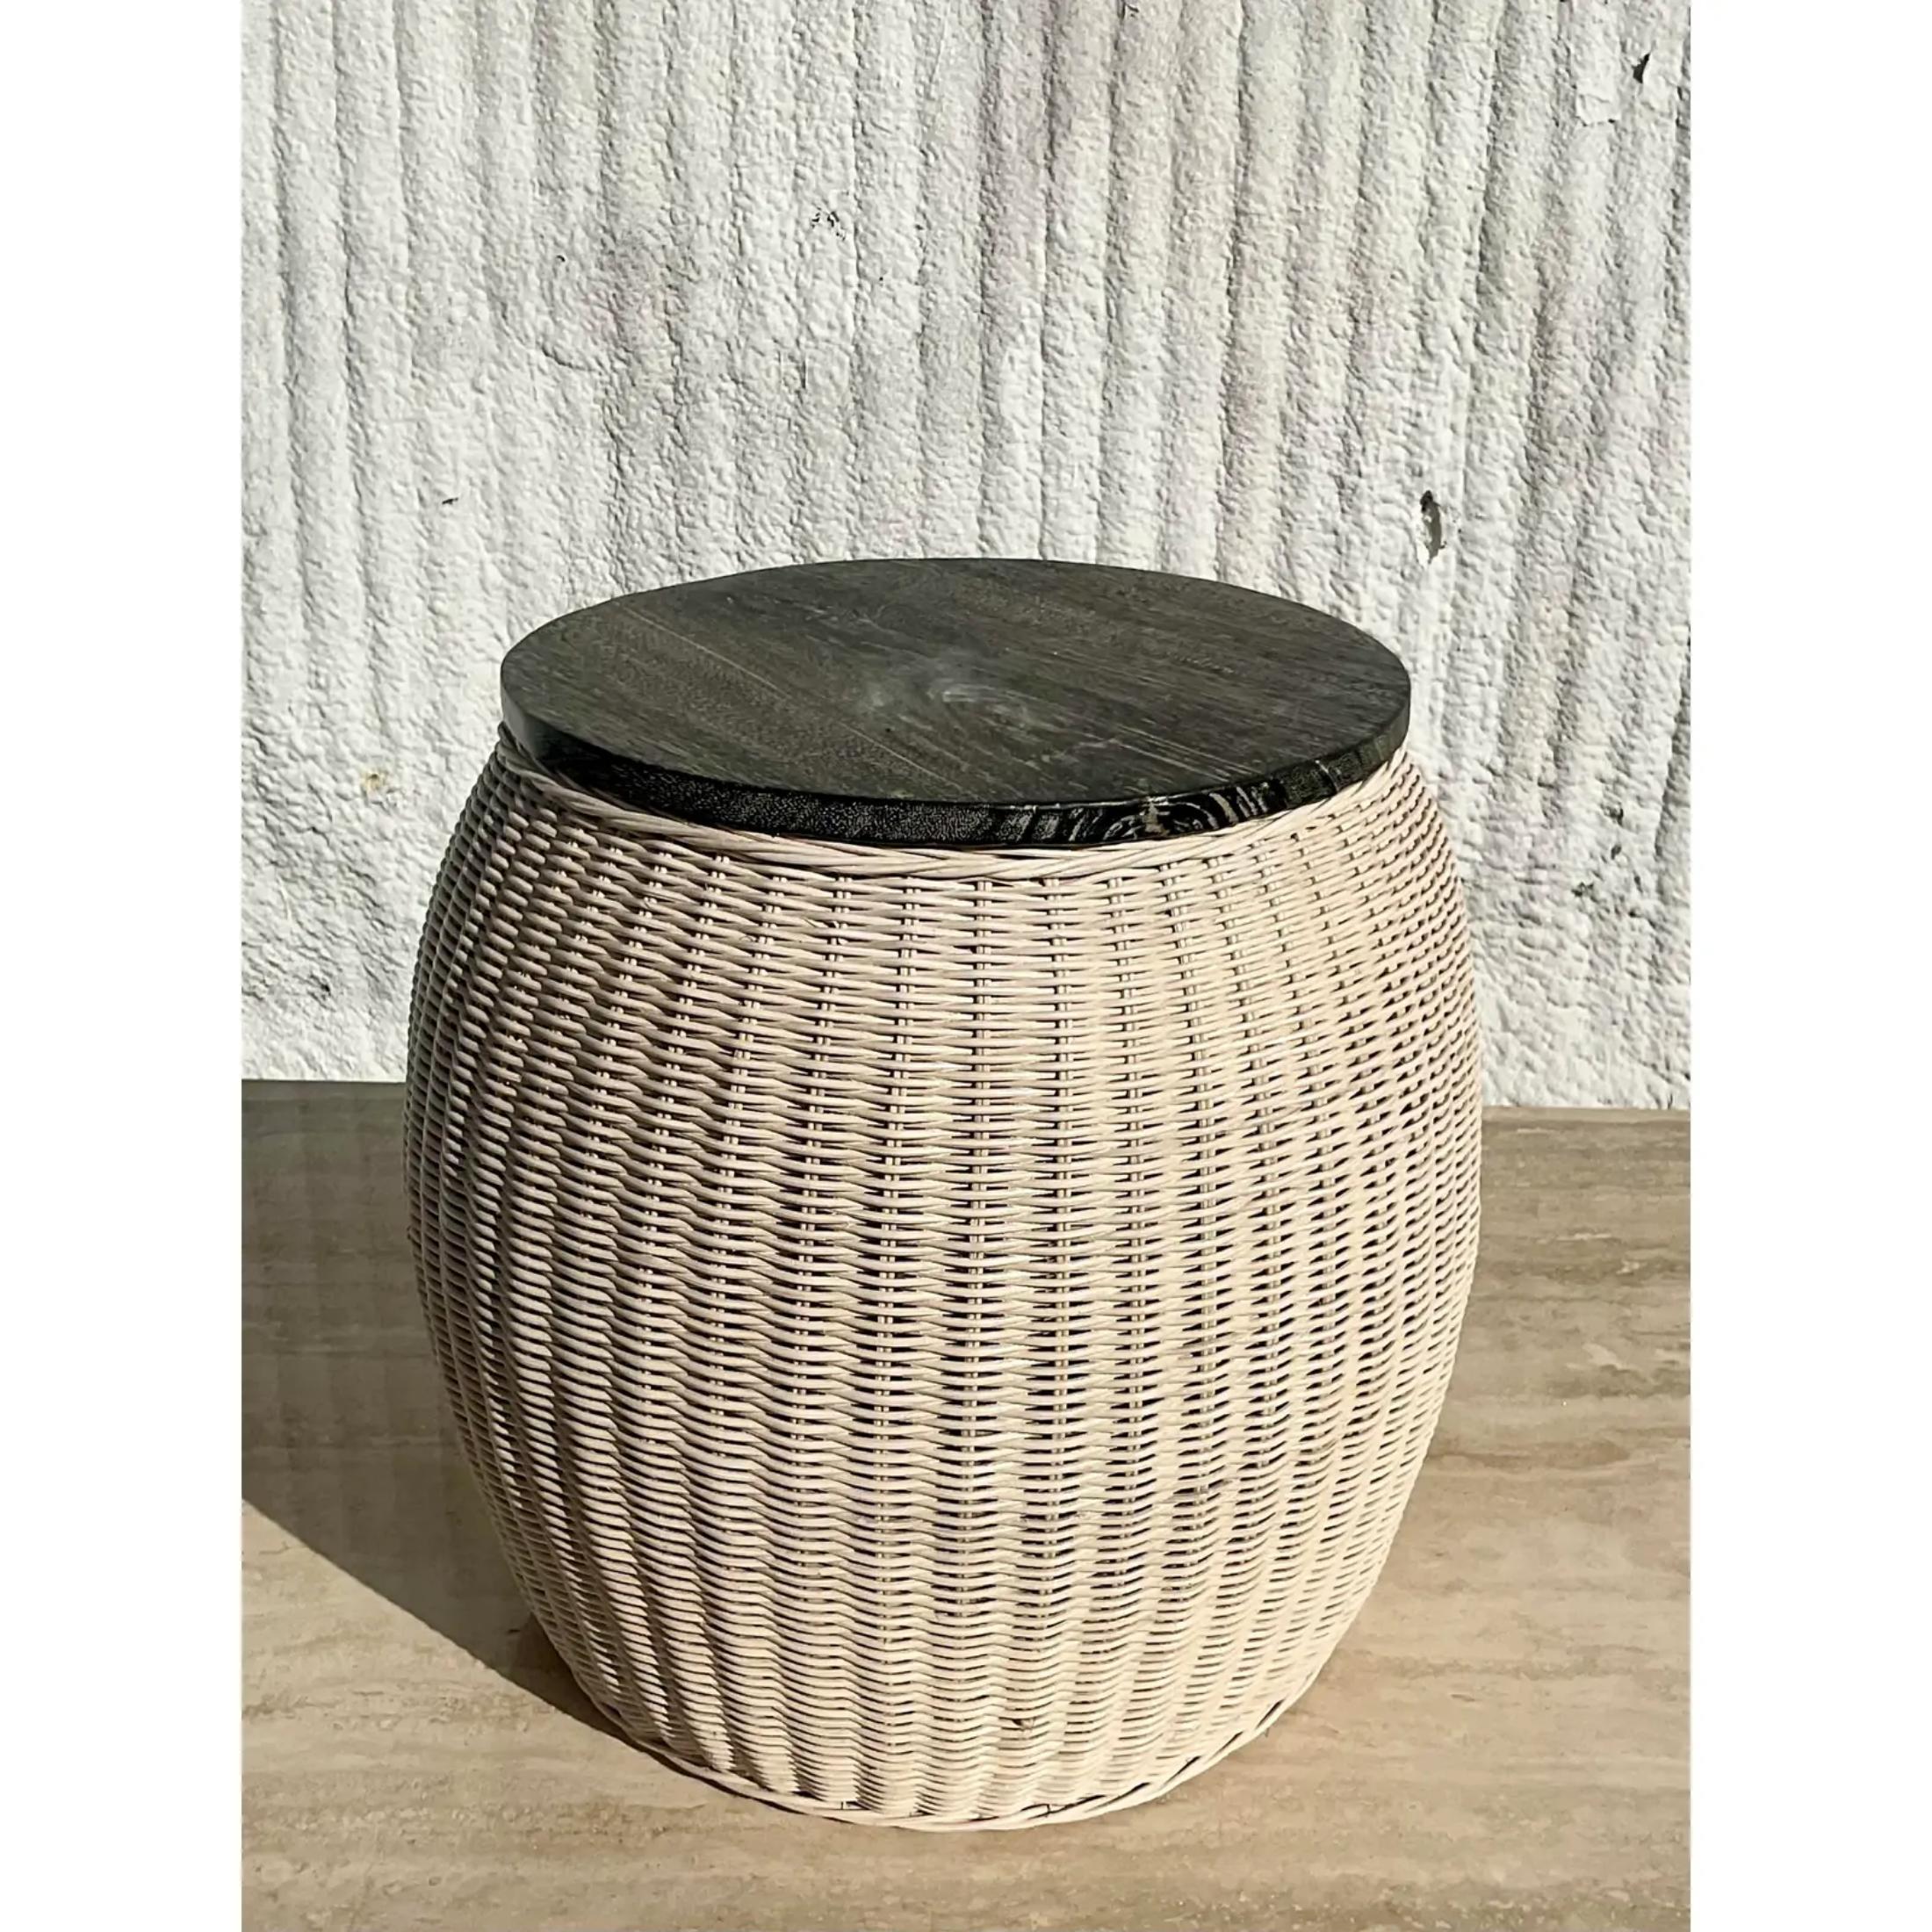 A fabulous Contemporary side table. Beautiful woven rattan with a limed ebony wood top. Chic in its simplicity. Perfect as a side table and or a easy to move drinks table. Super versatile. Acquired from a Palm Beach estate